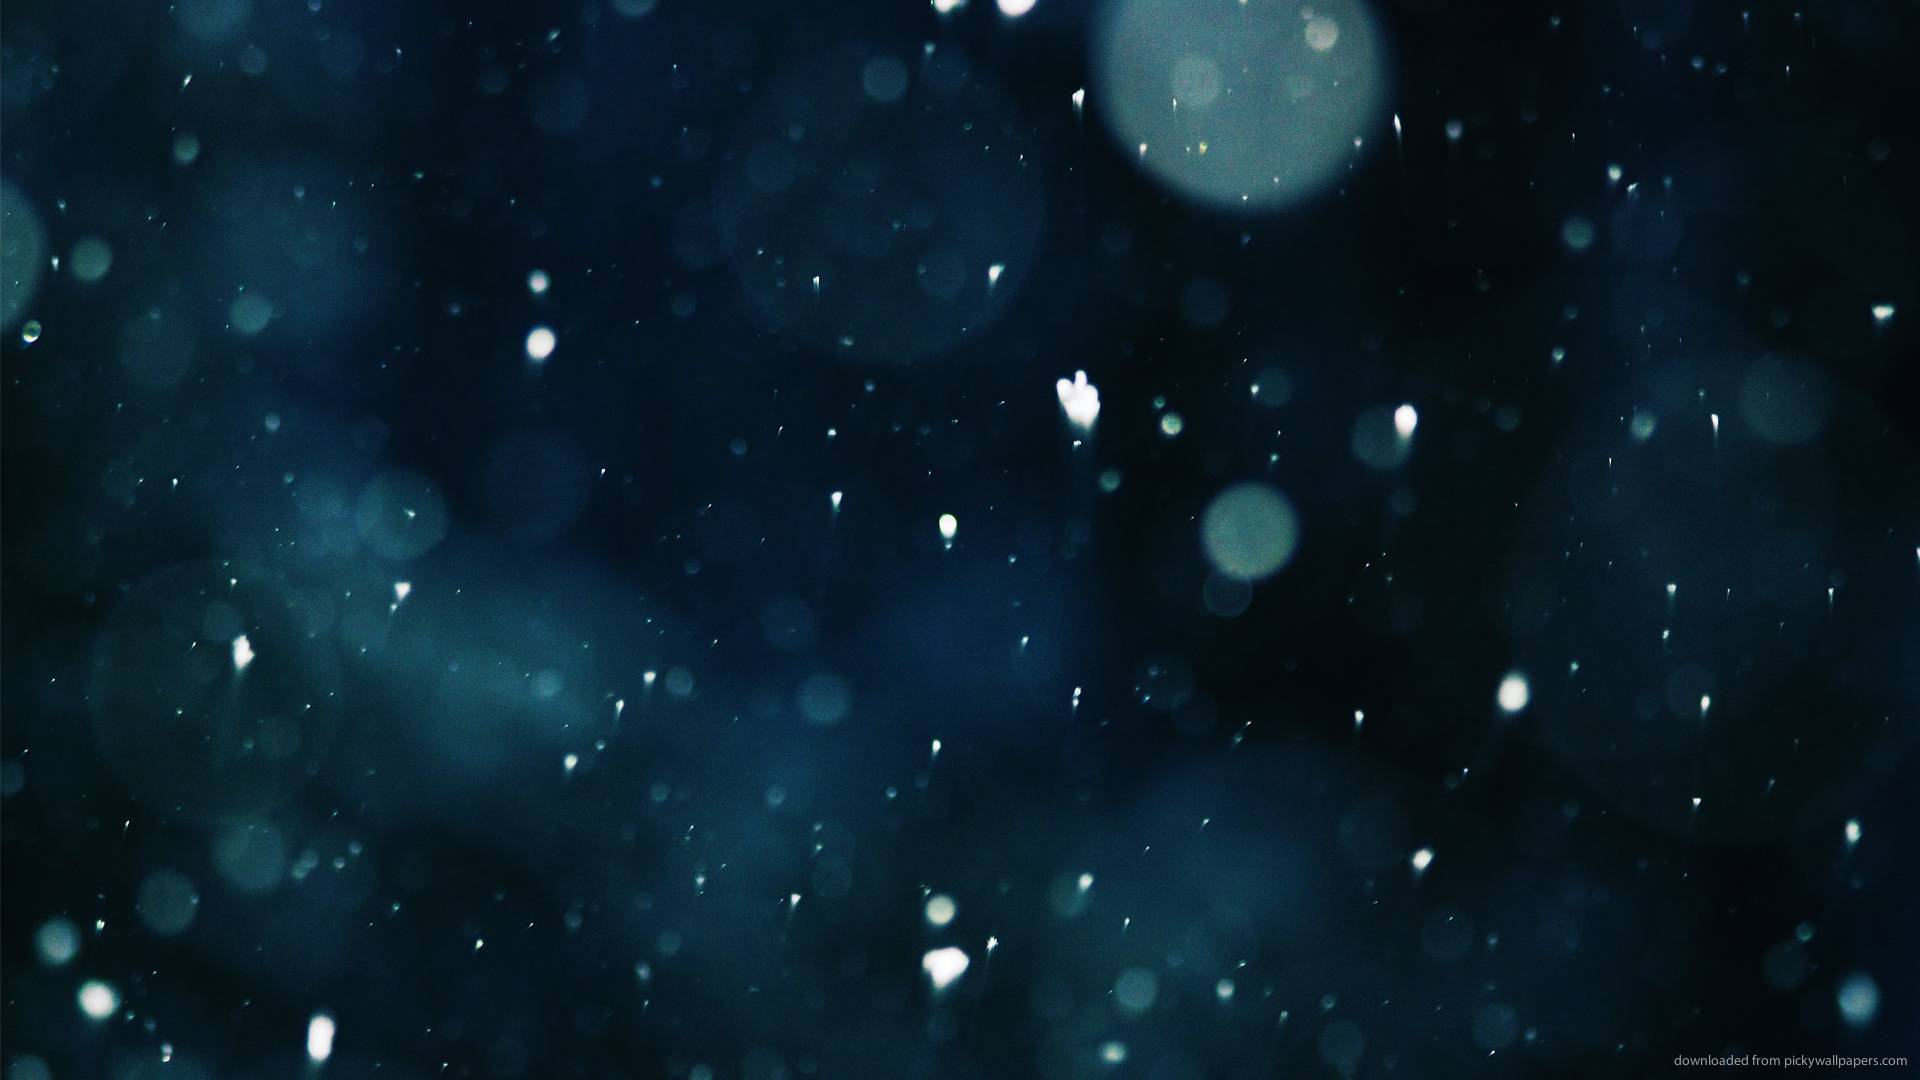 Dark Blue Wallpaper 1920×1080 Download 1920×1080 Snowflakes In A